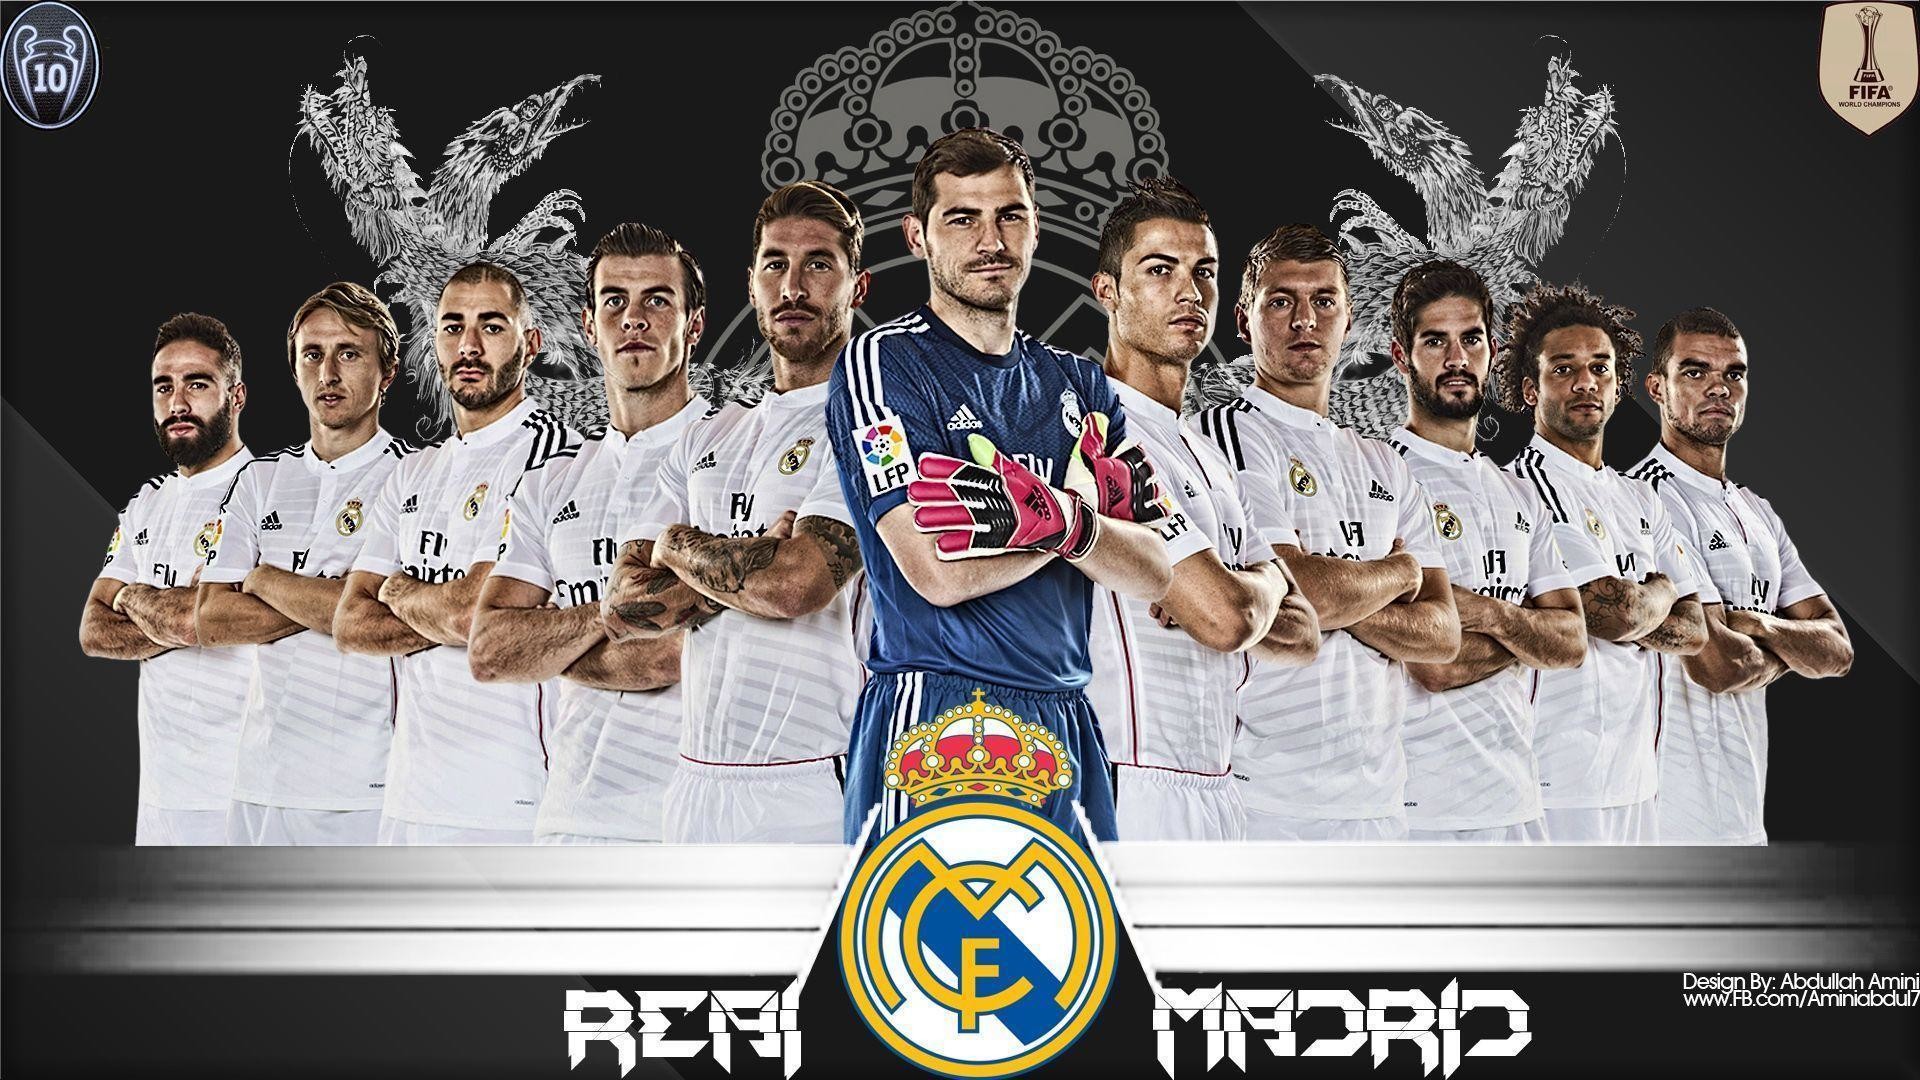 Free download Real Madrid HD Wallpaper 2018 64 images [1920x1080 ...